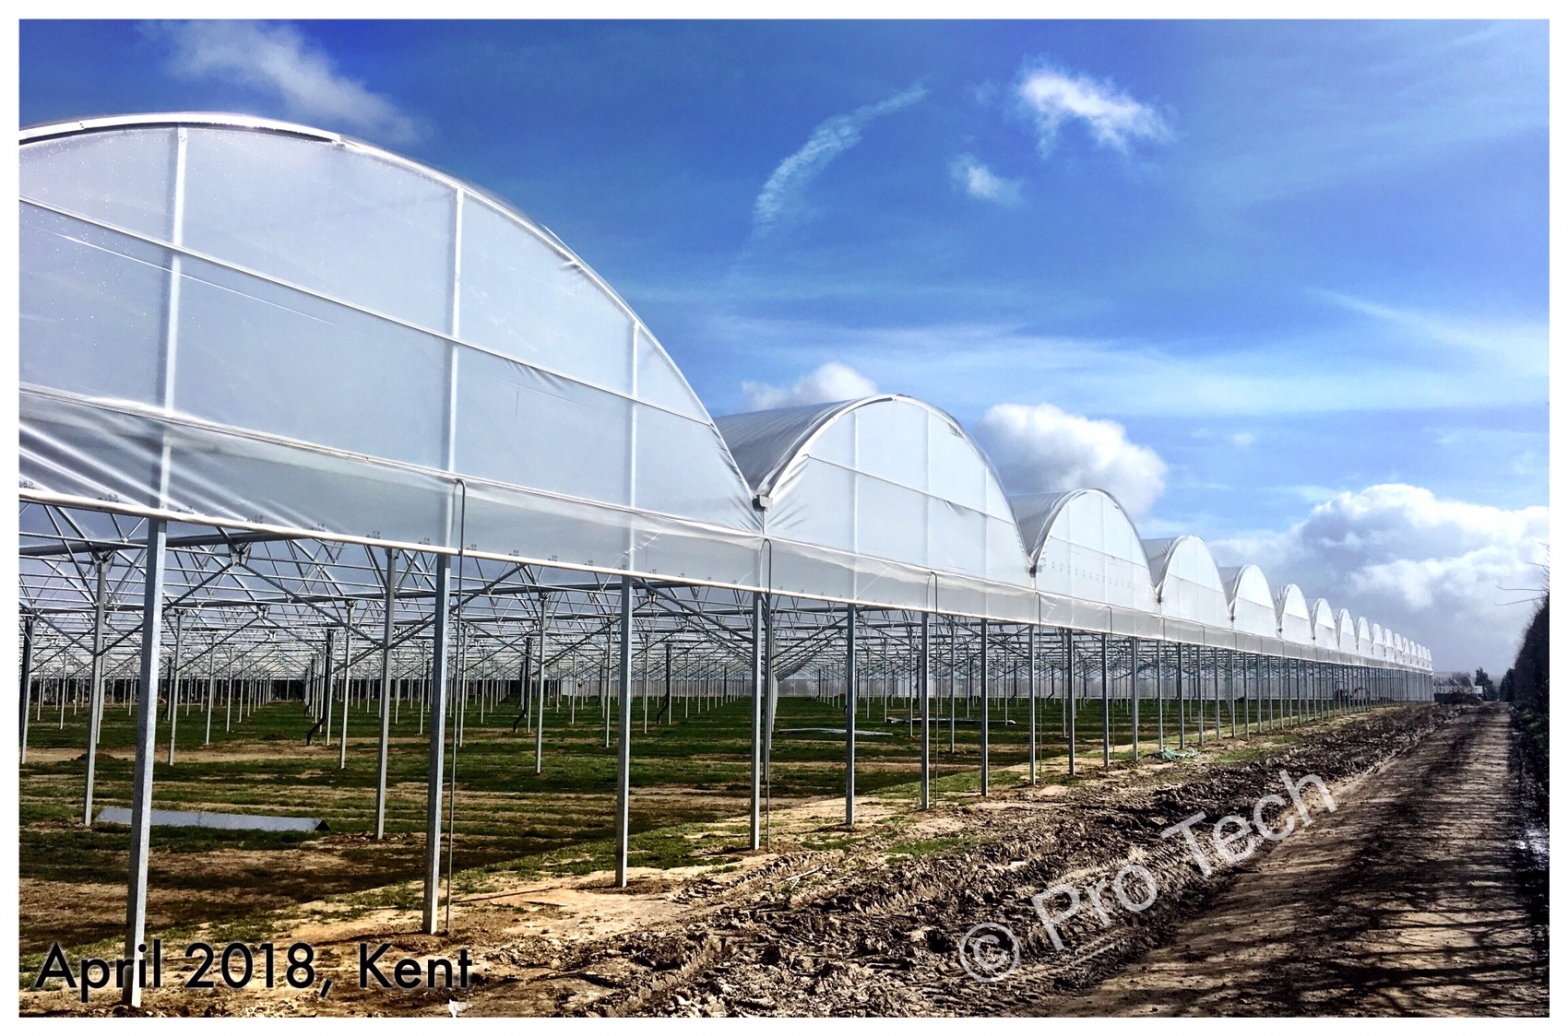 Protech, Greenhouse, Commercial greenhouse, strawberry, raspberry, farming, climate control, greenhouse polythene, water management, Kentish strawberry, Kentish raspberry 